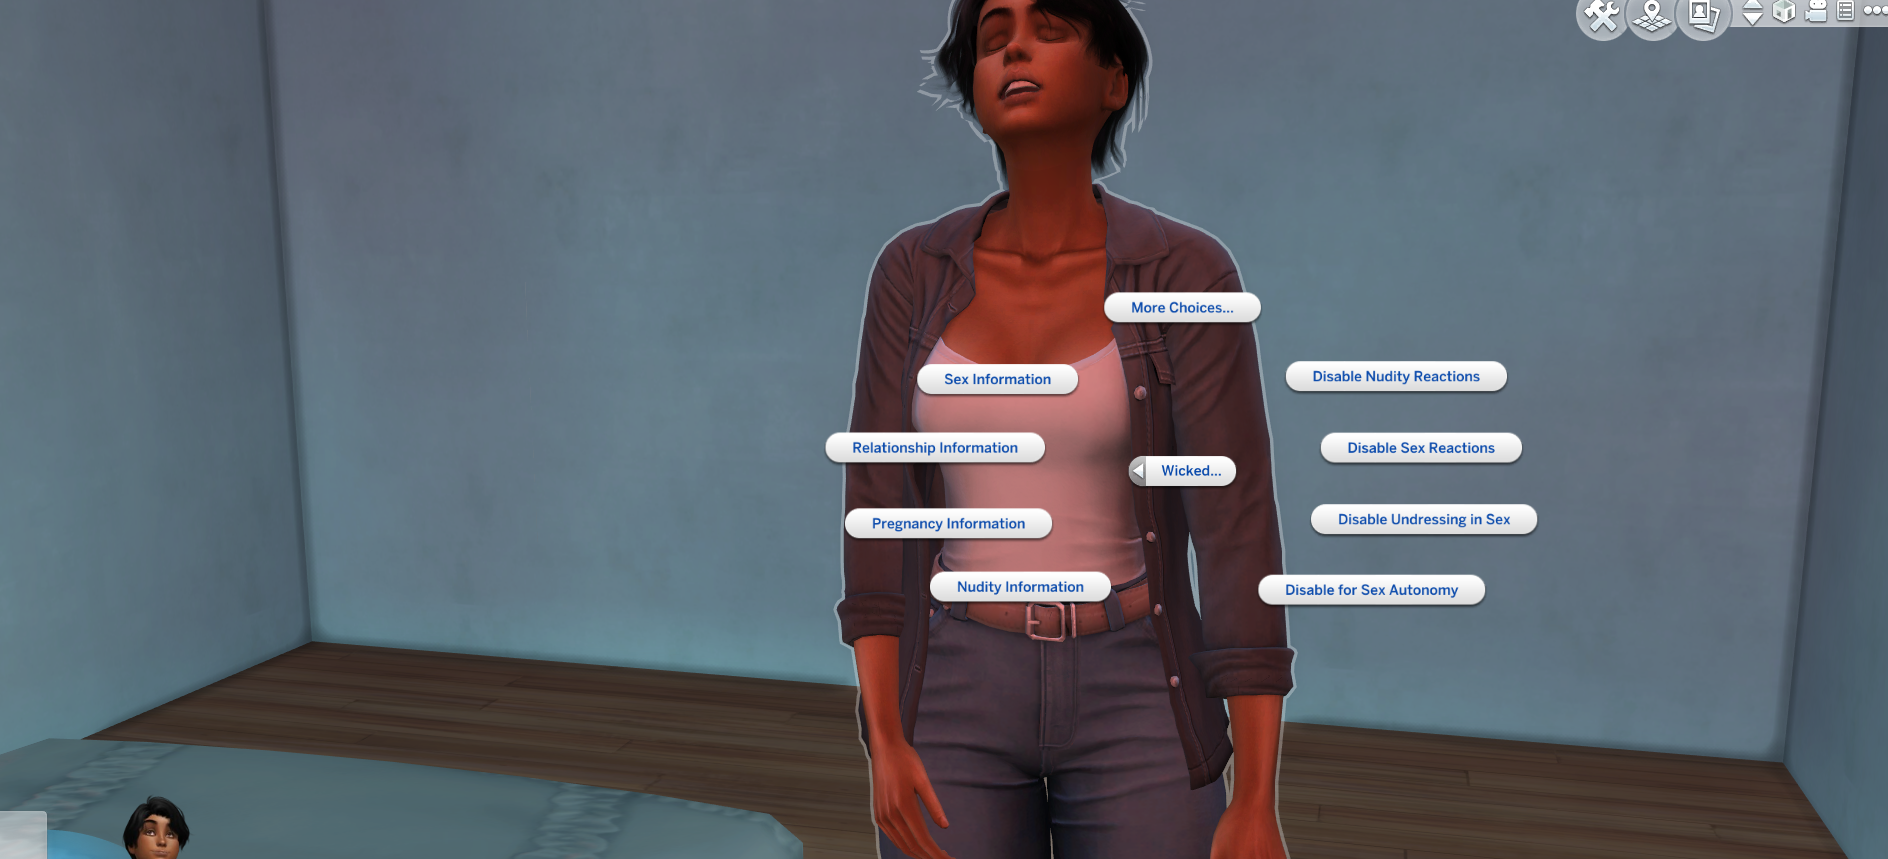 download sims 4 wicked mod